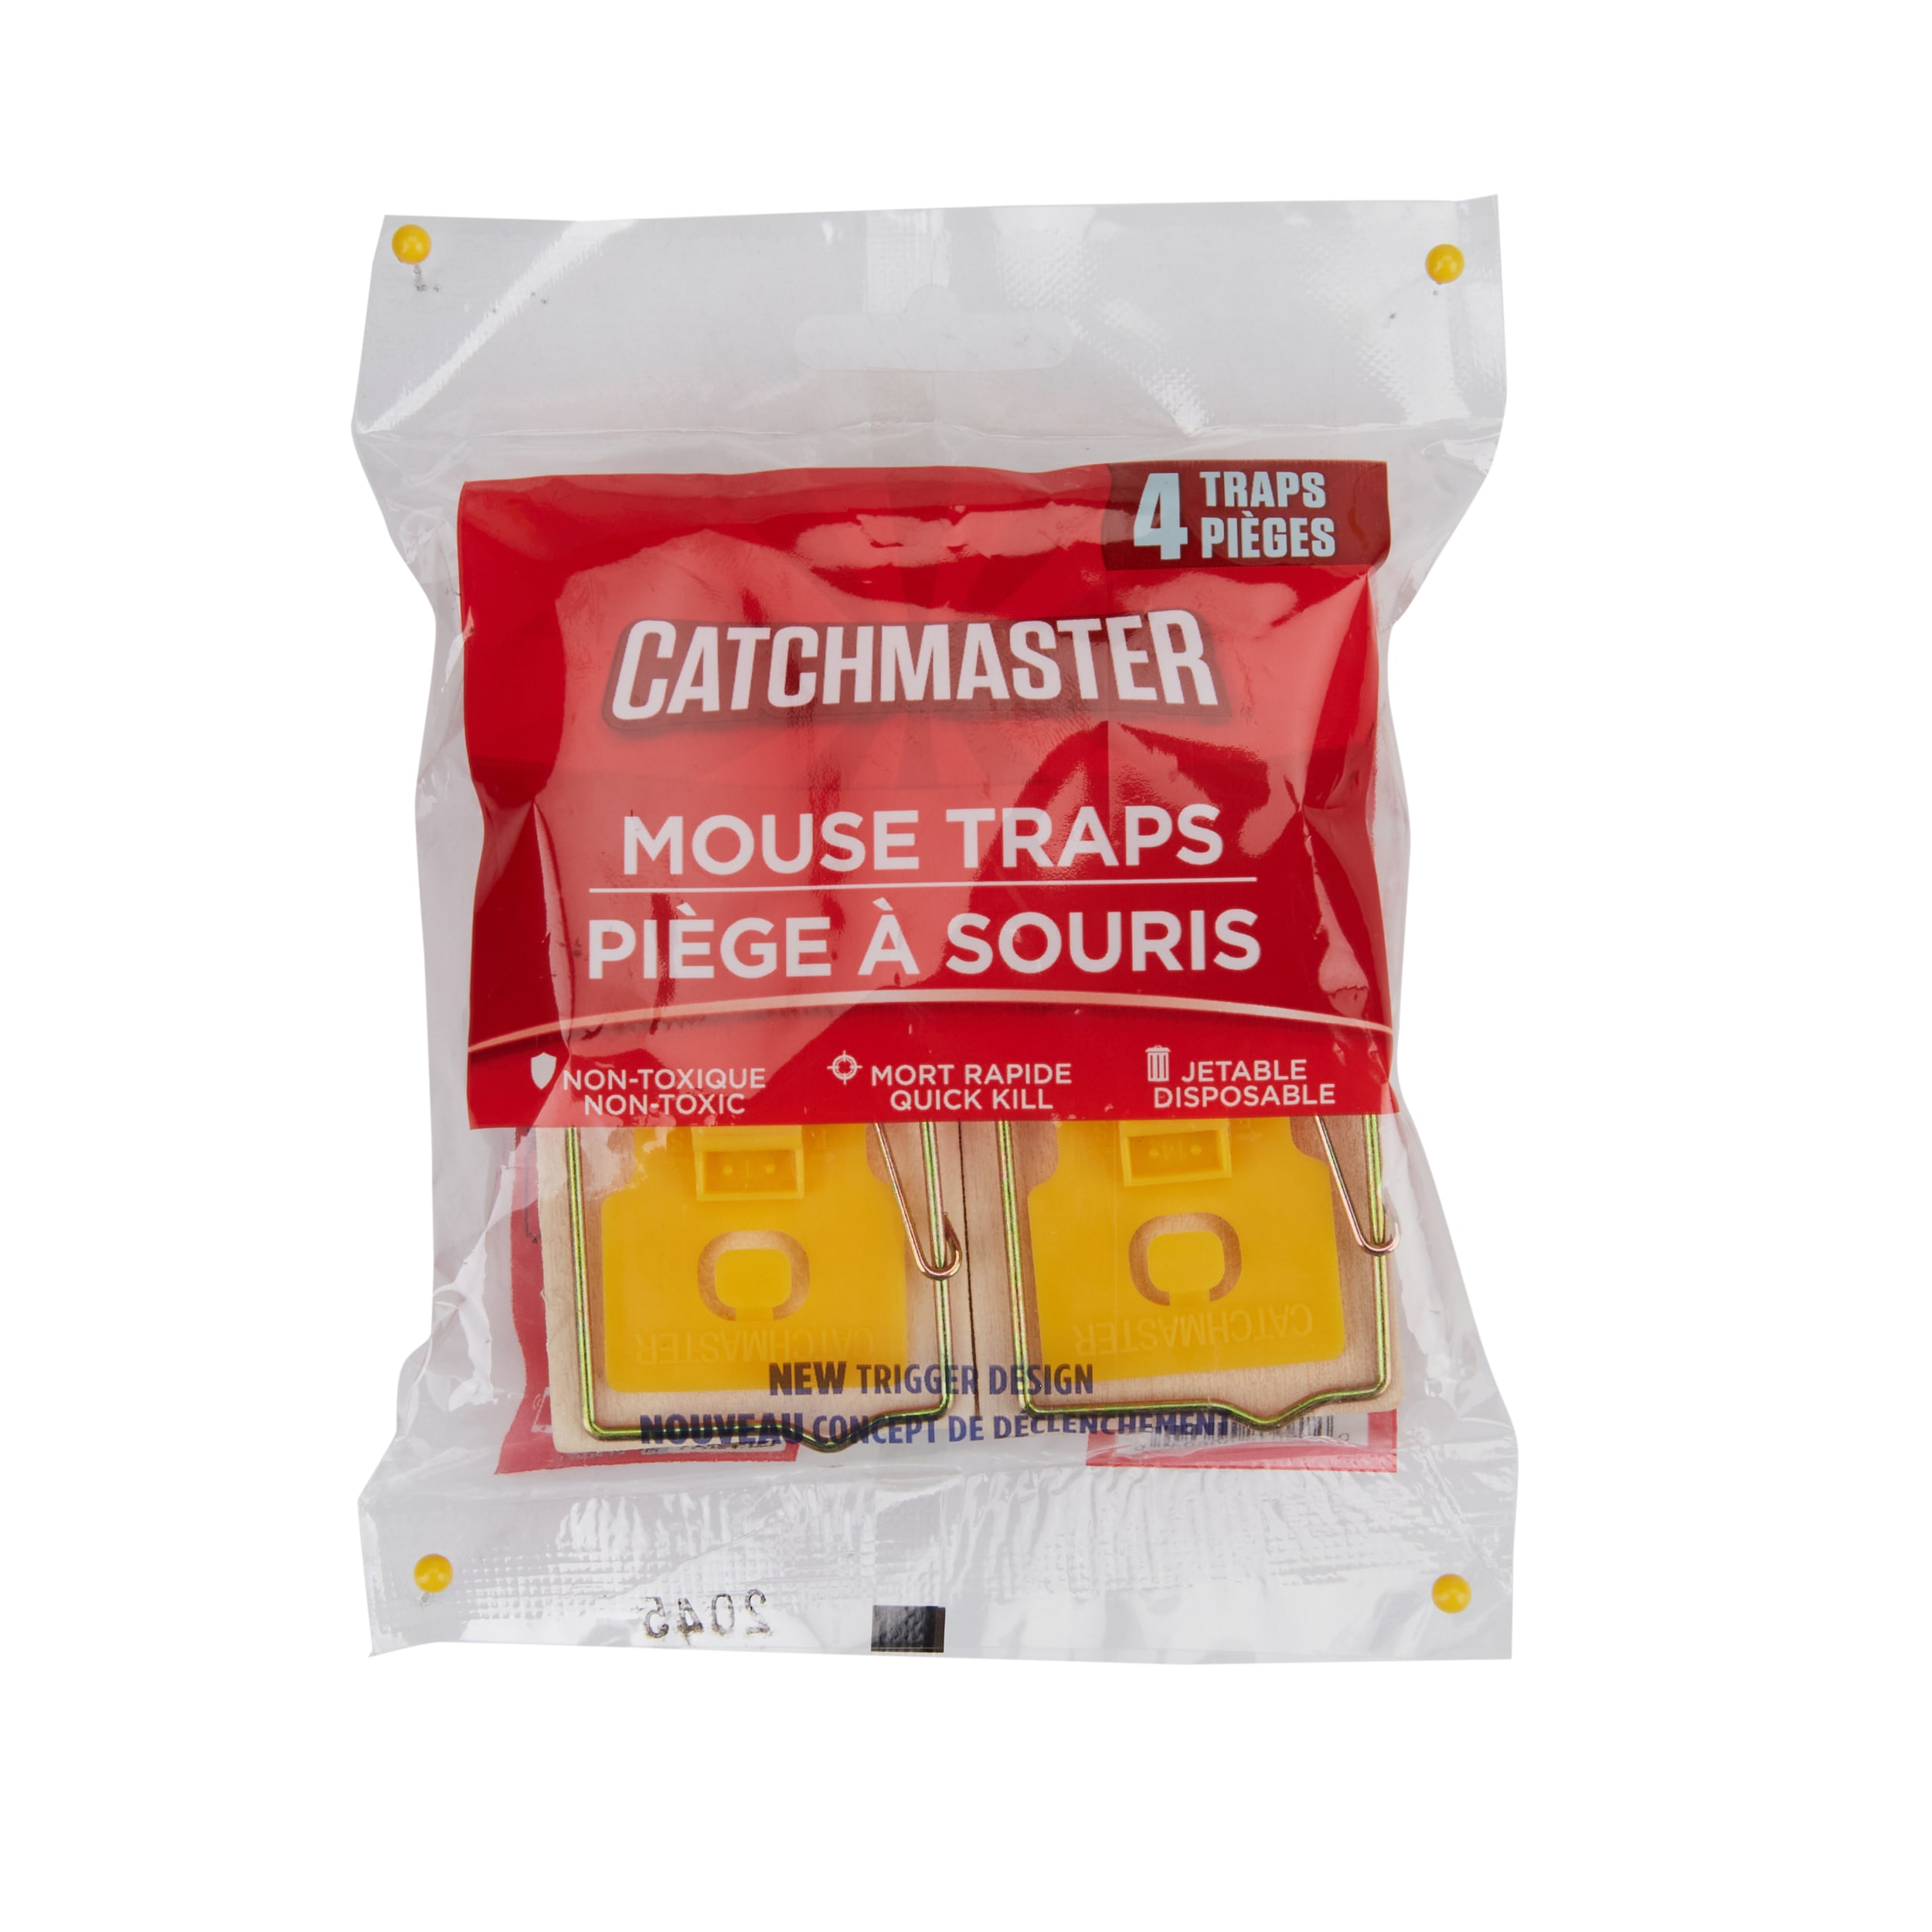 Save on Catchmaster Mouse Traps Order Online Delivery